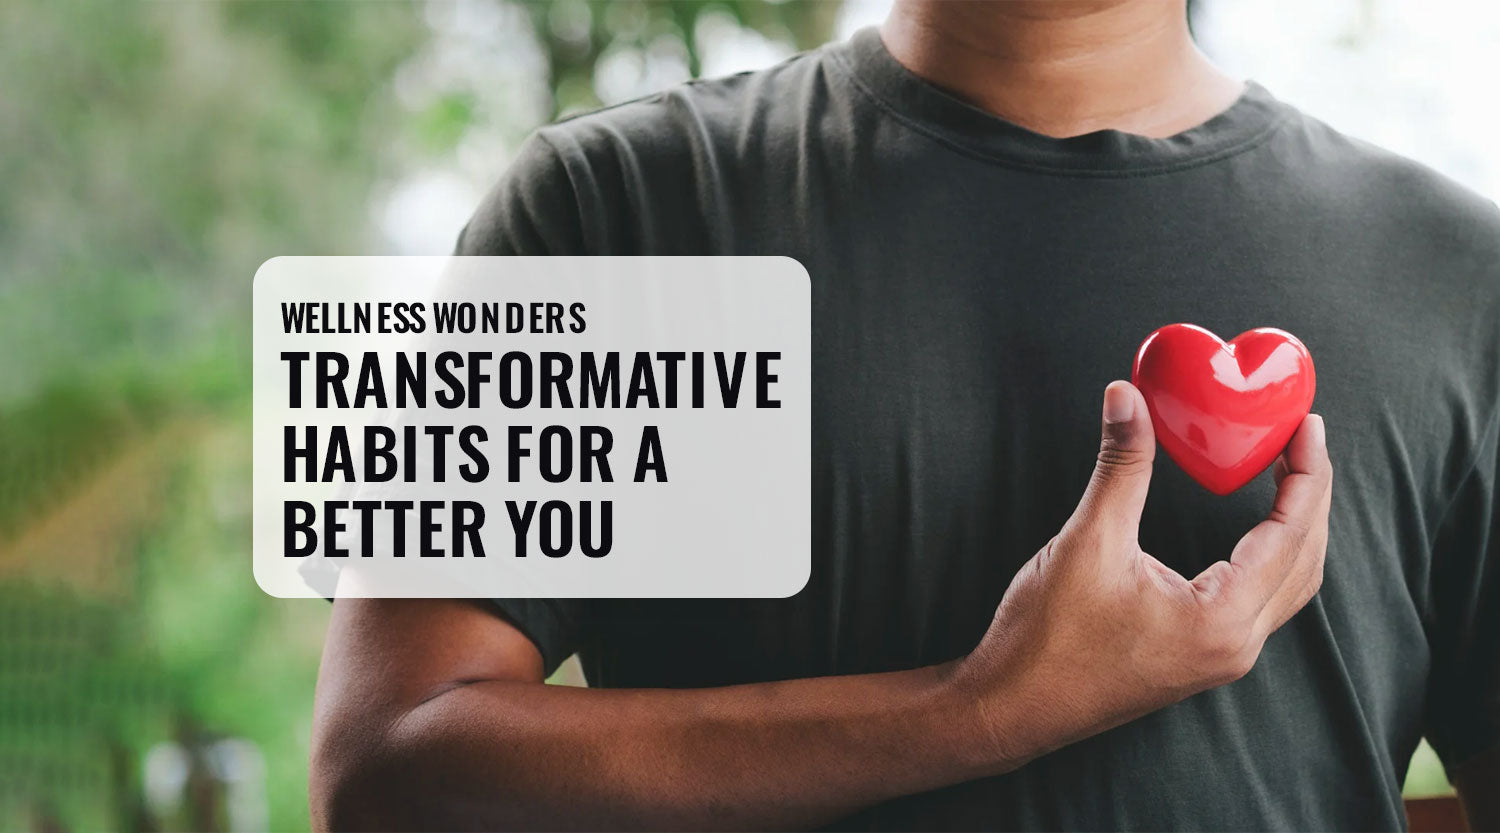 Wellness Wonders: Transformative Habits for a Better You